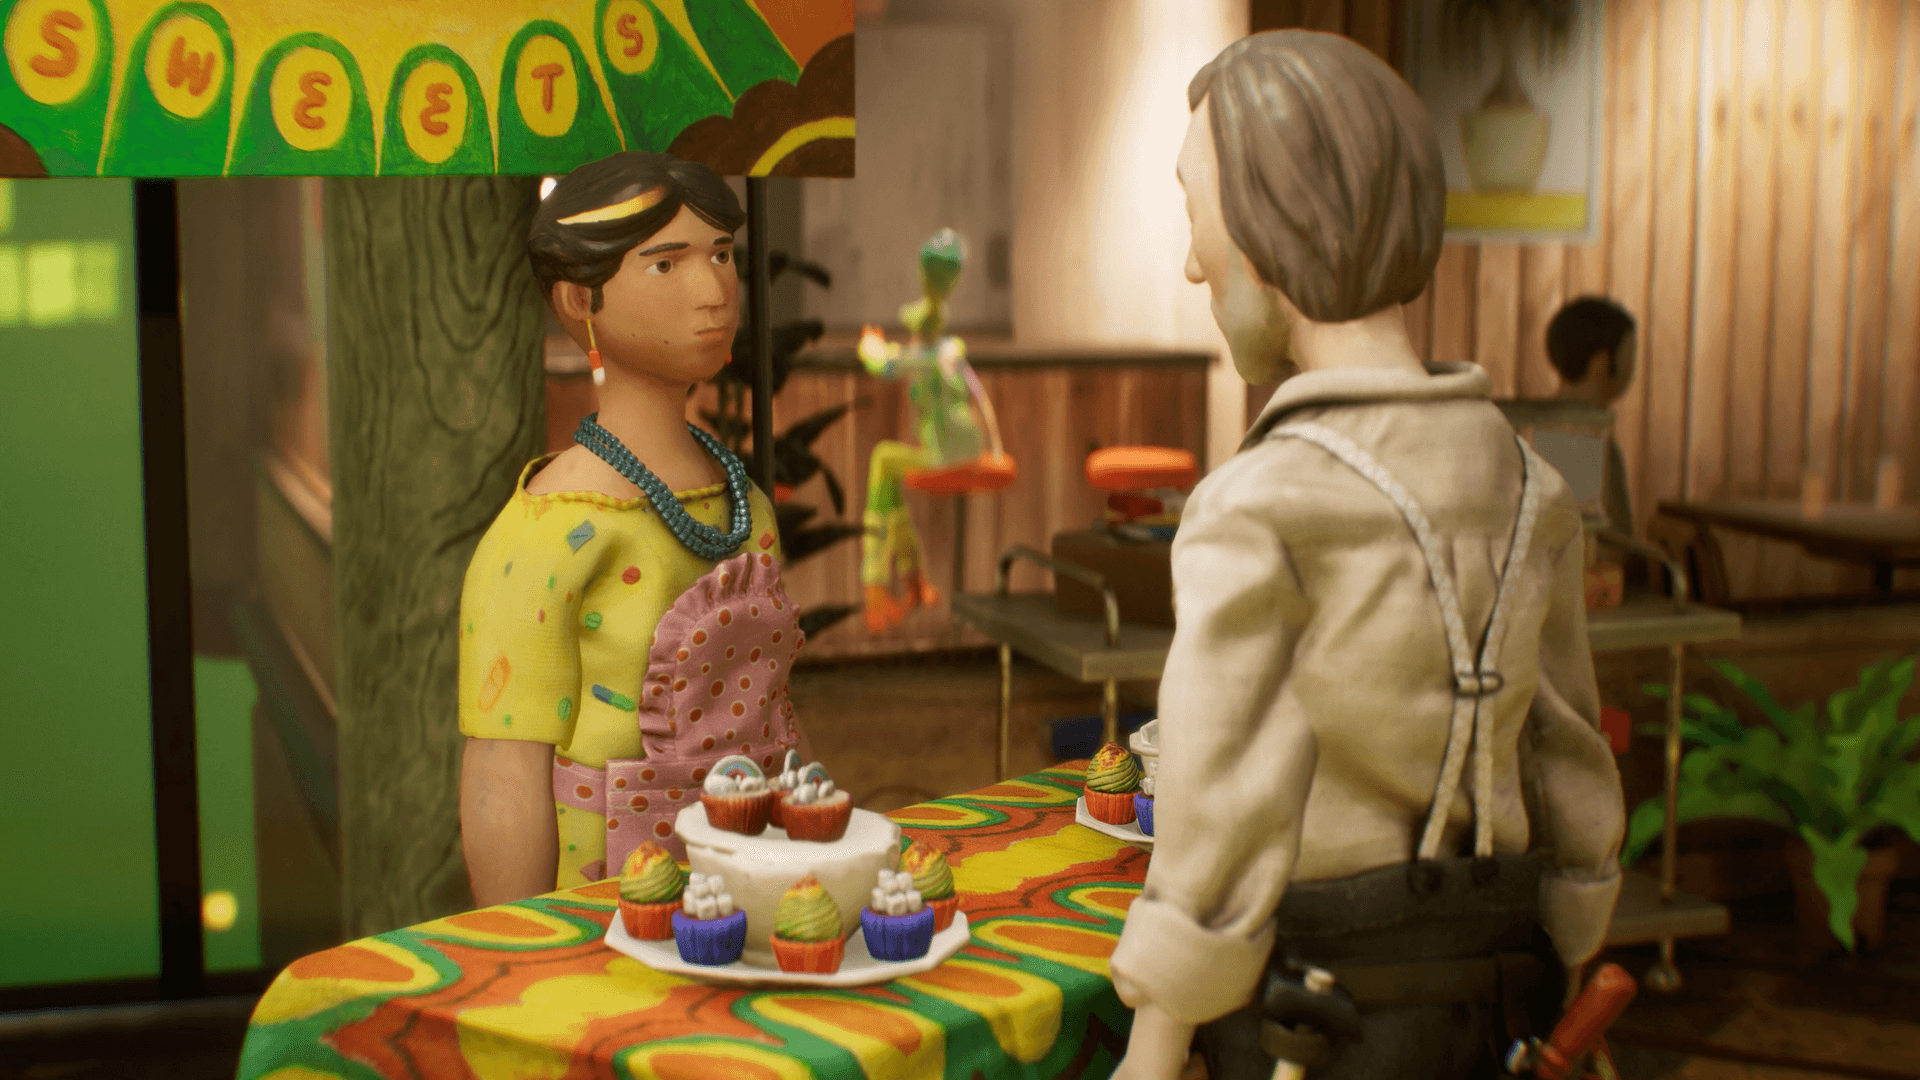 A colourful claymation scene with two characters in the foreground conversing